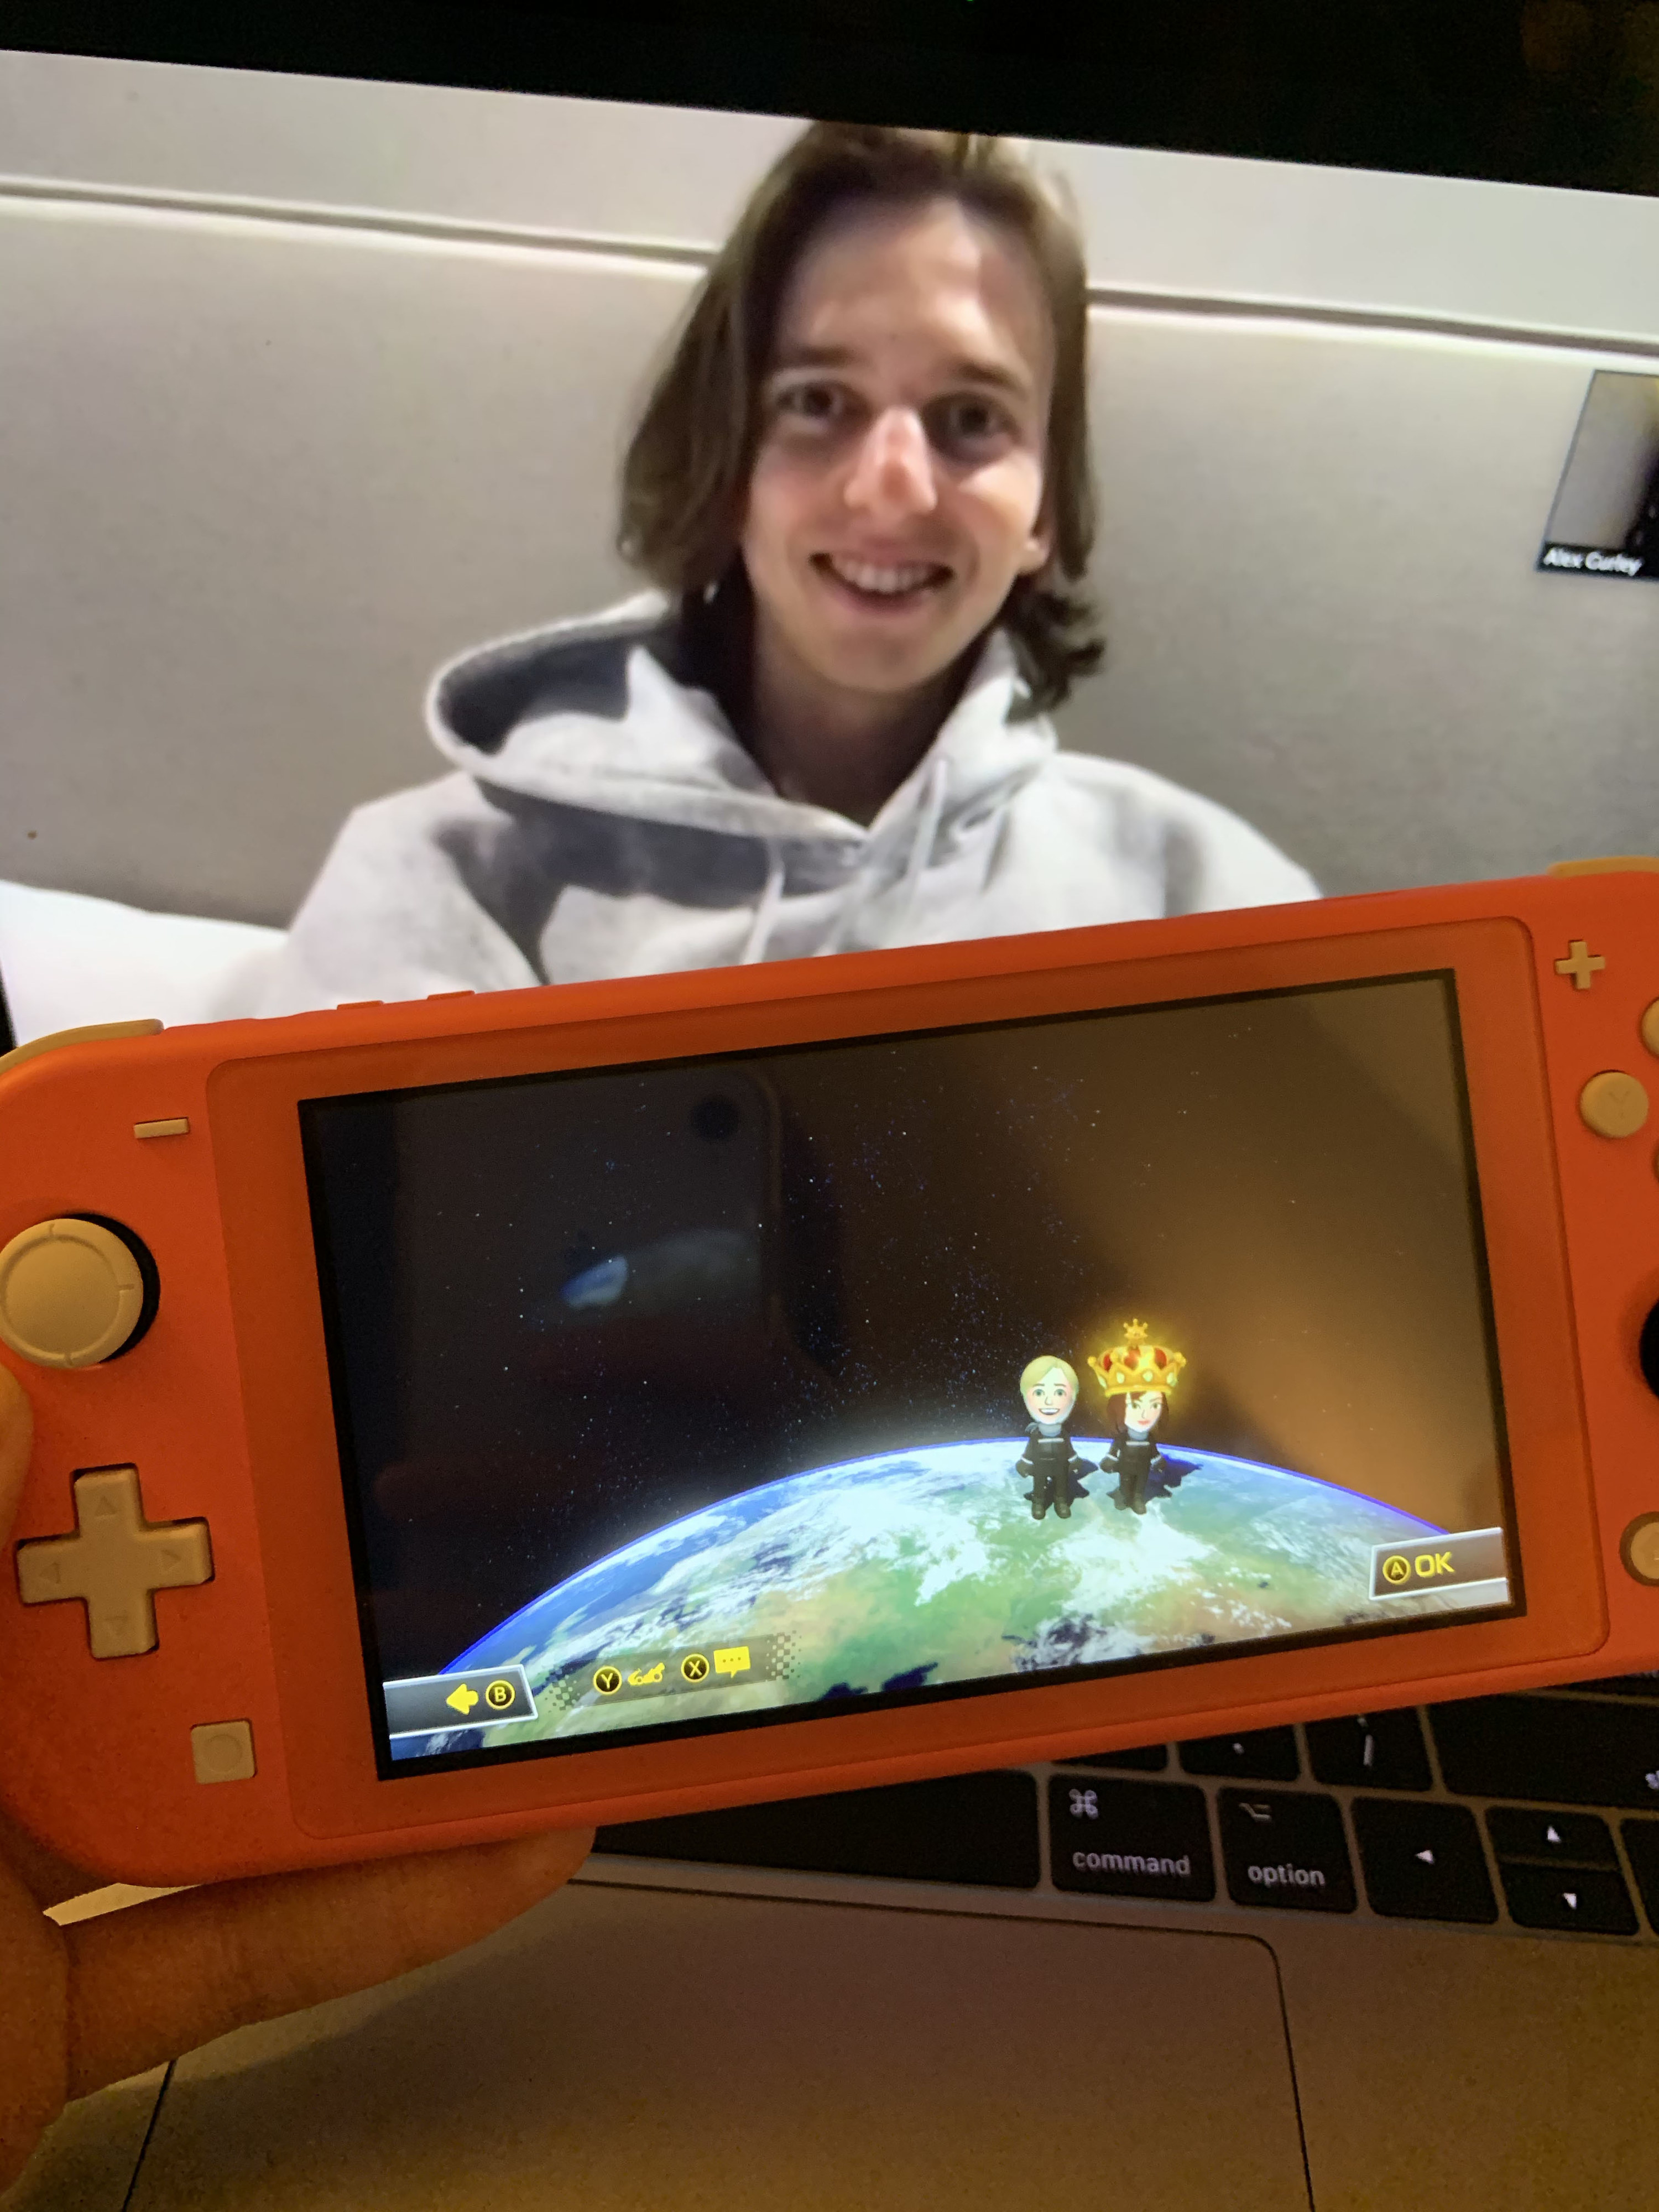 Stephen on FaceTime while playing Mario Kart on the Switch